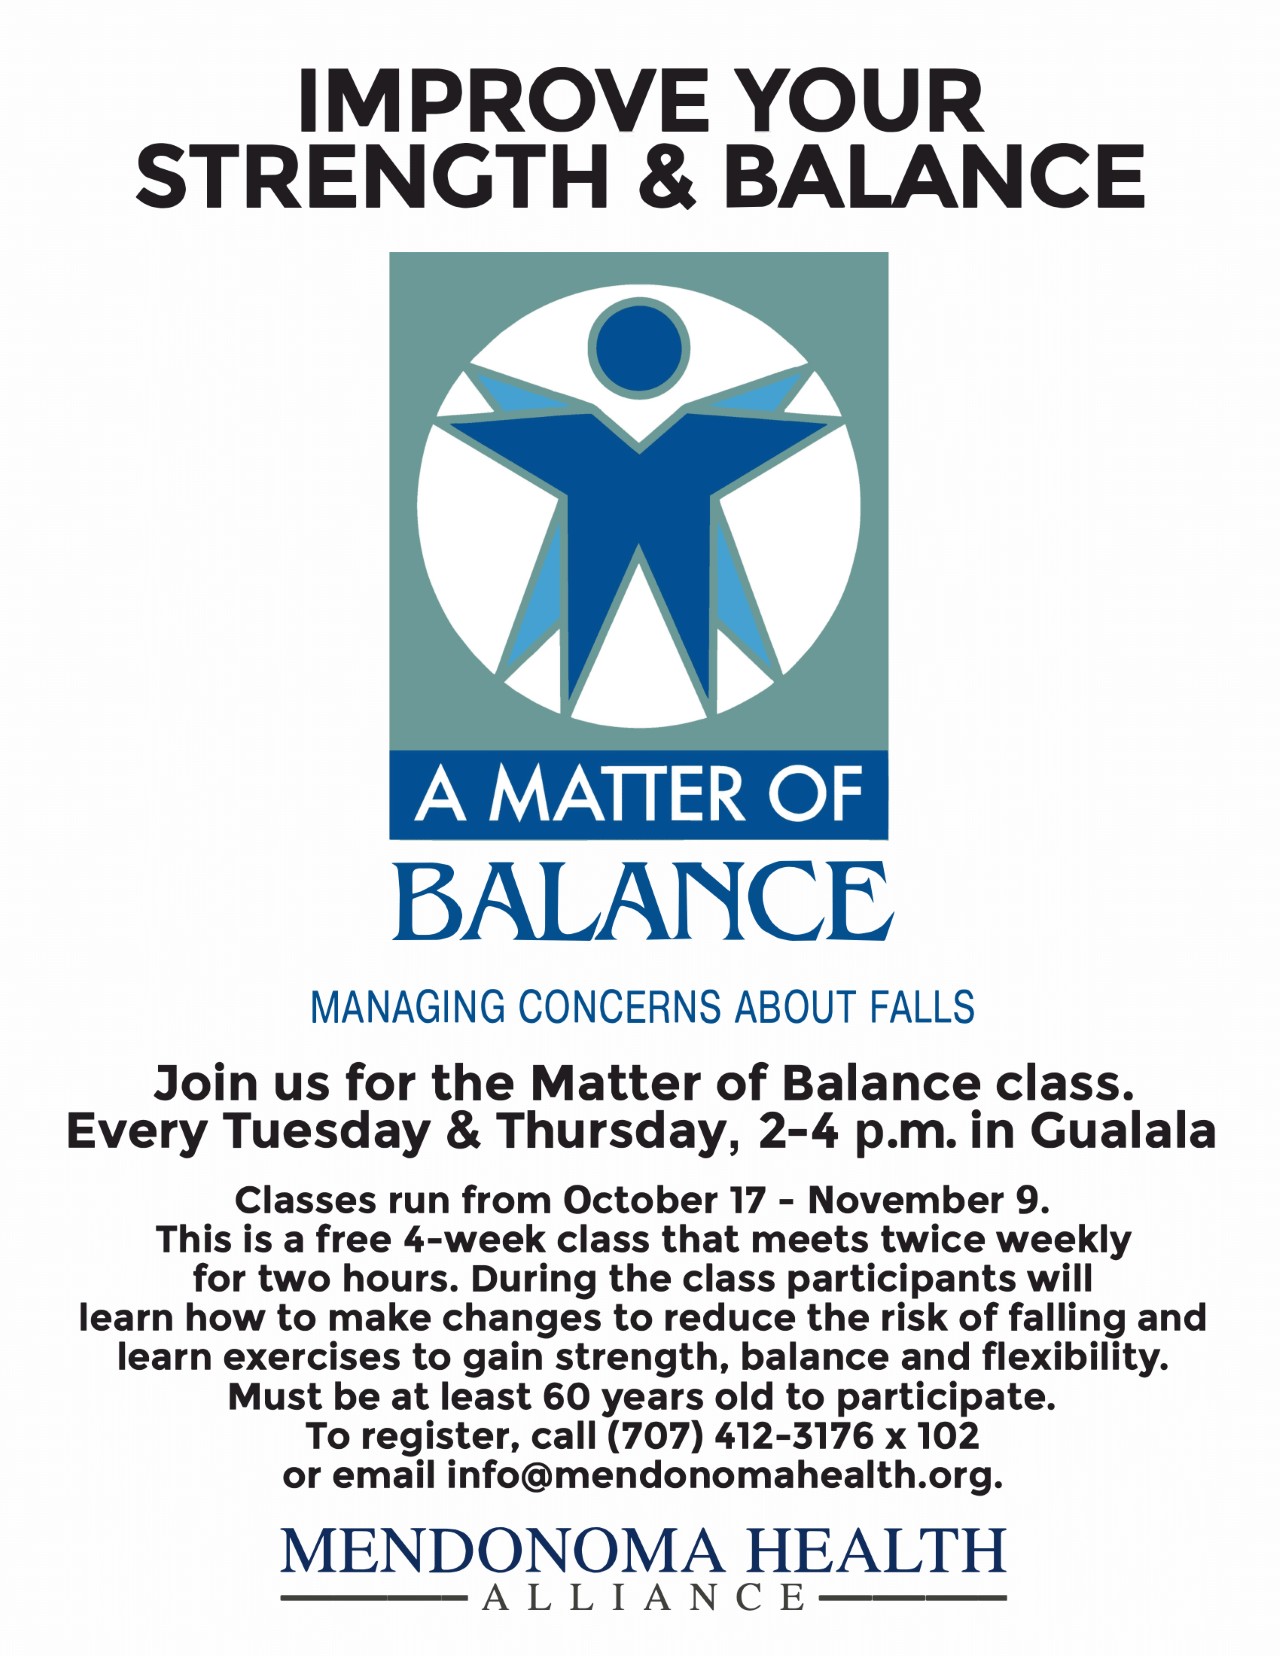 Flyer for Matter of Balance with an artistic image of someone stretching. Tuesday & Thursday 2-4pm. Free in Gualala. Register (707) 412-3176 x102